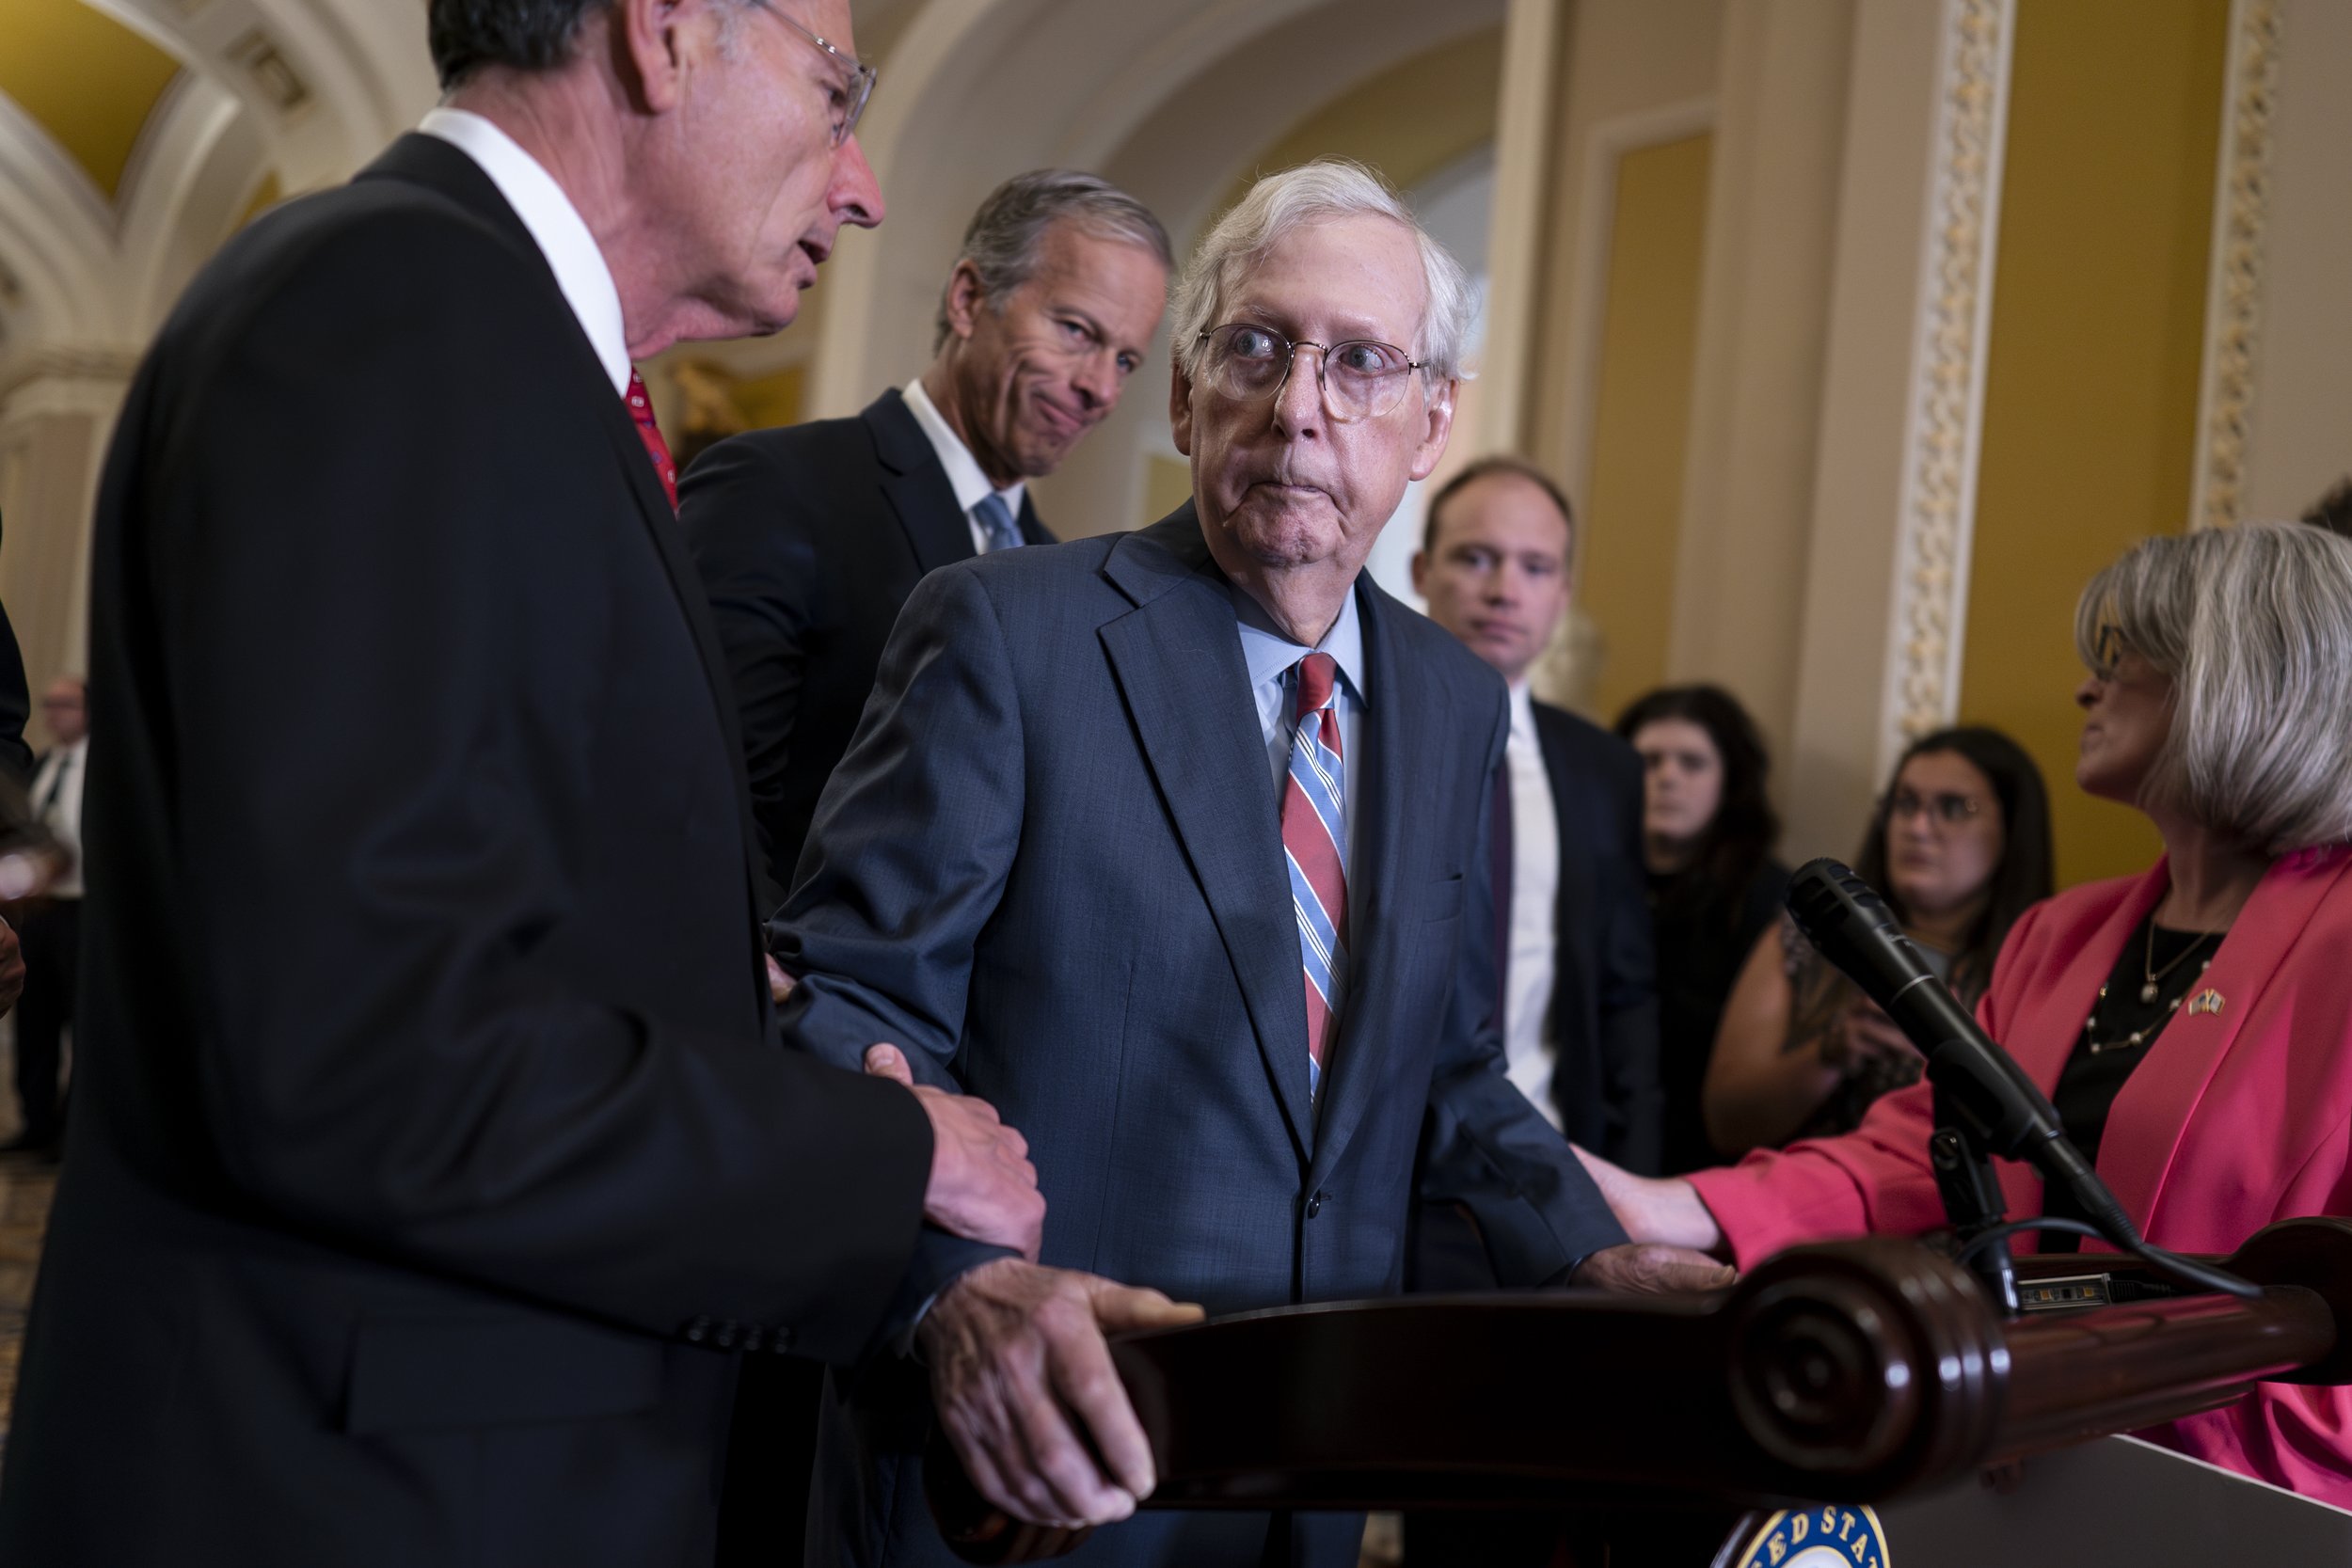  U.S. Senate Minority Leader Mitch McConnell, R-Ky., center, is helped by, from left, Sen. John Barrasso, R-Wyo., Sen. John Thune, R-S.D., and Sen. Joni Ernst, R-Iowa, after the 81-year-old GOP leader froze at the microphones as he arrived for a news